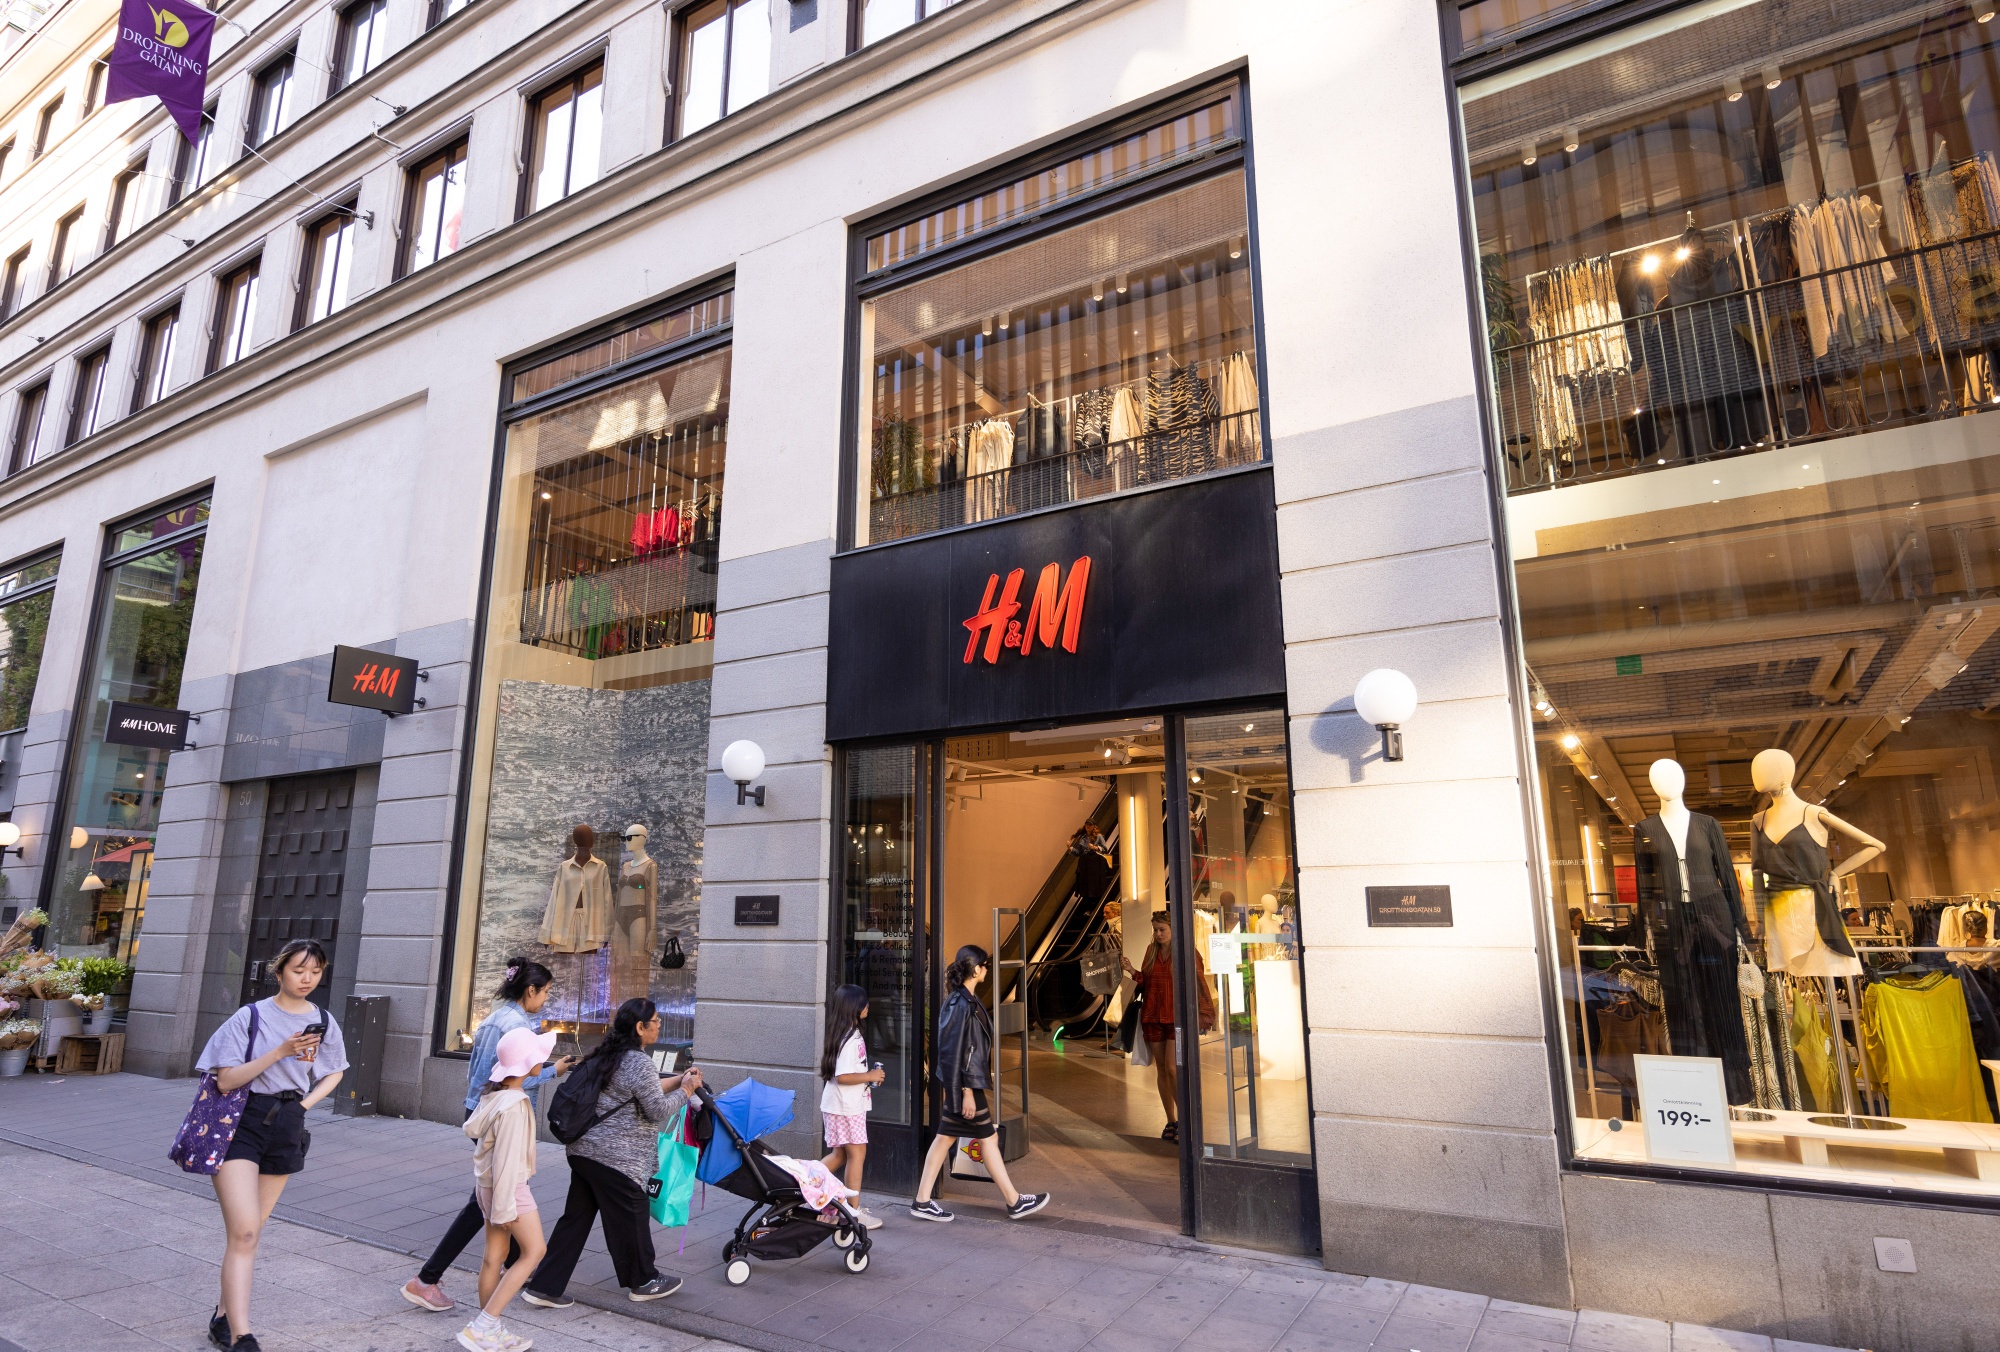 H&M sued over “misleading” marketing, Fashion & Retail News